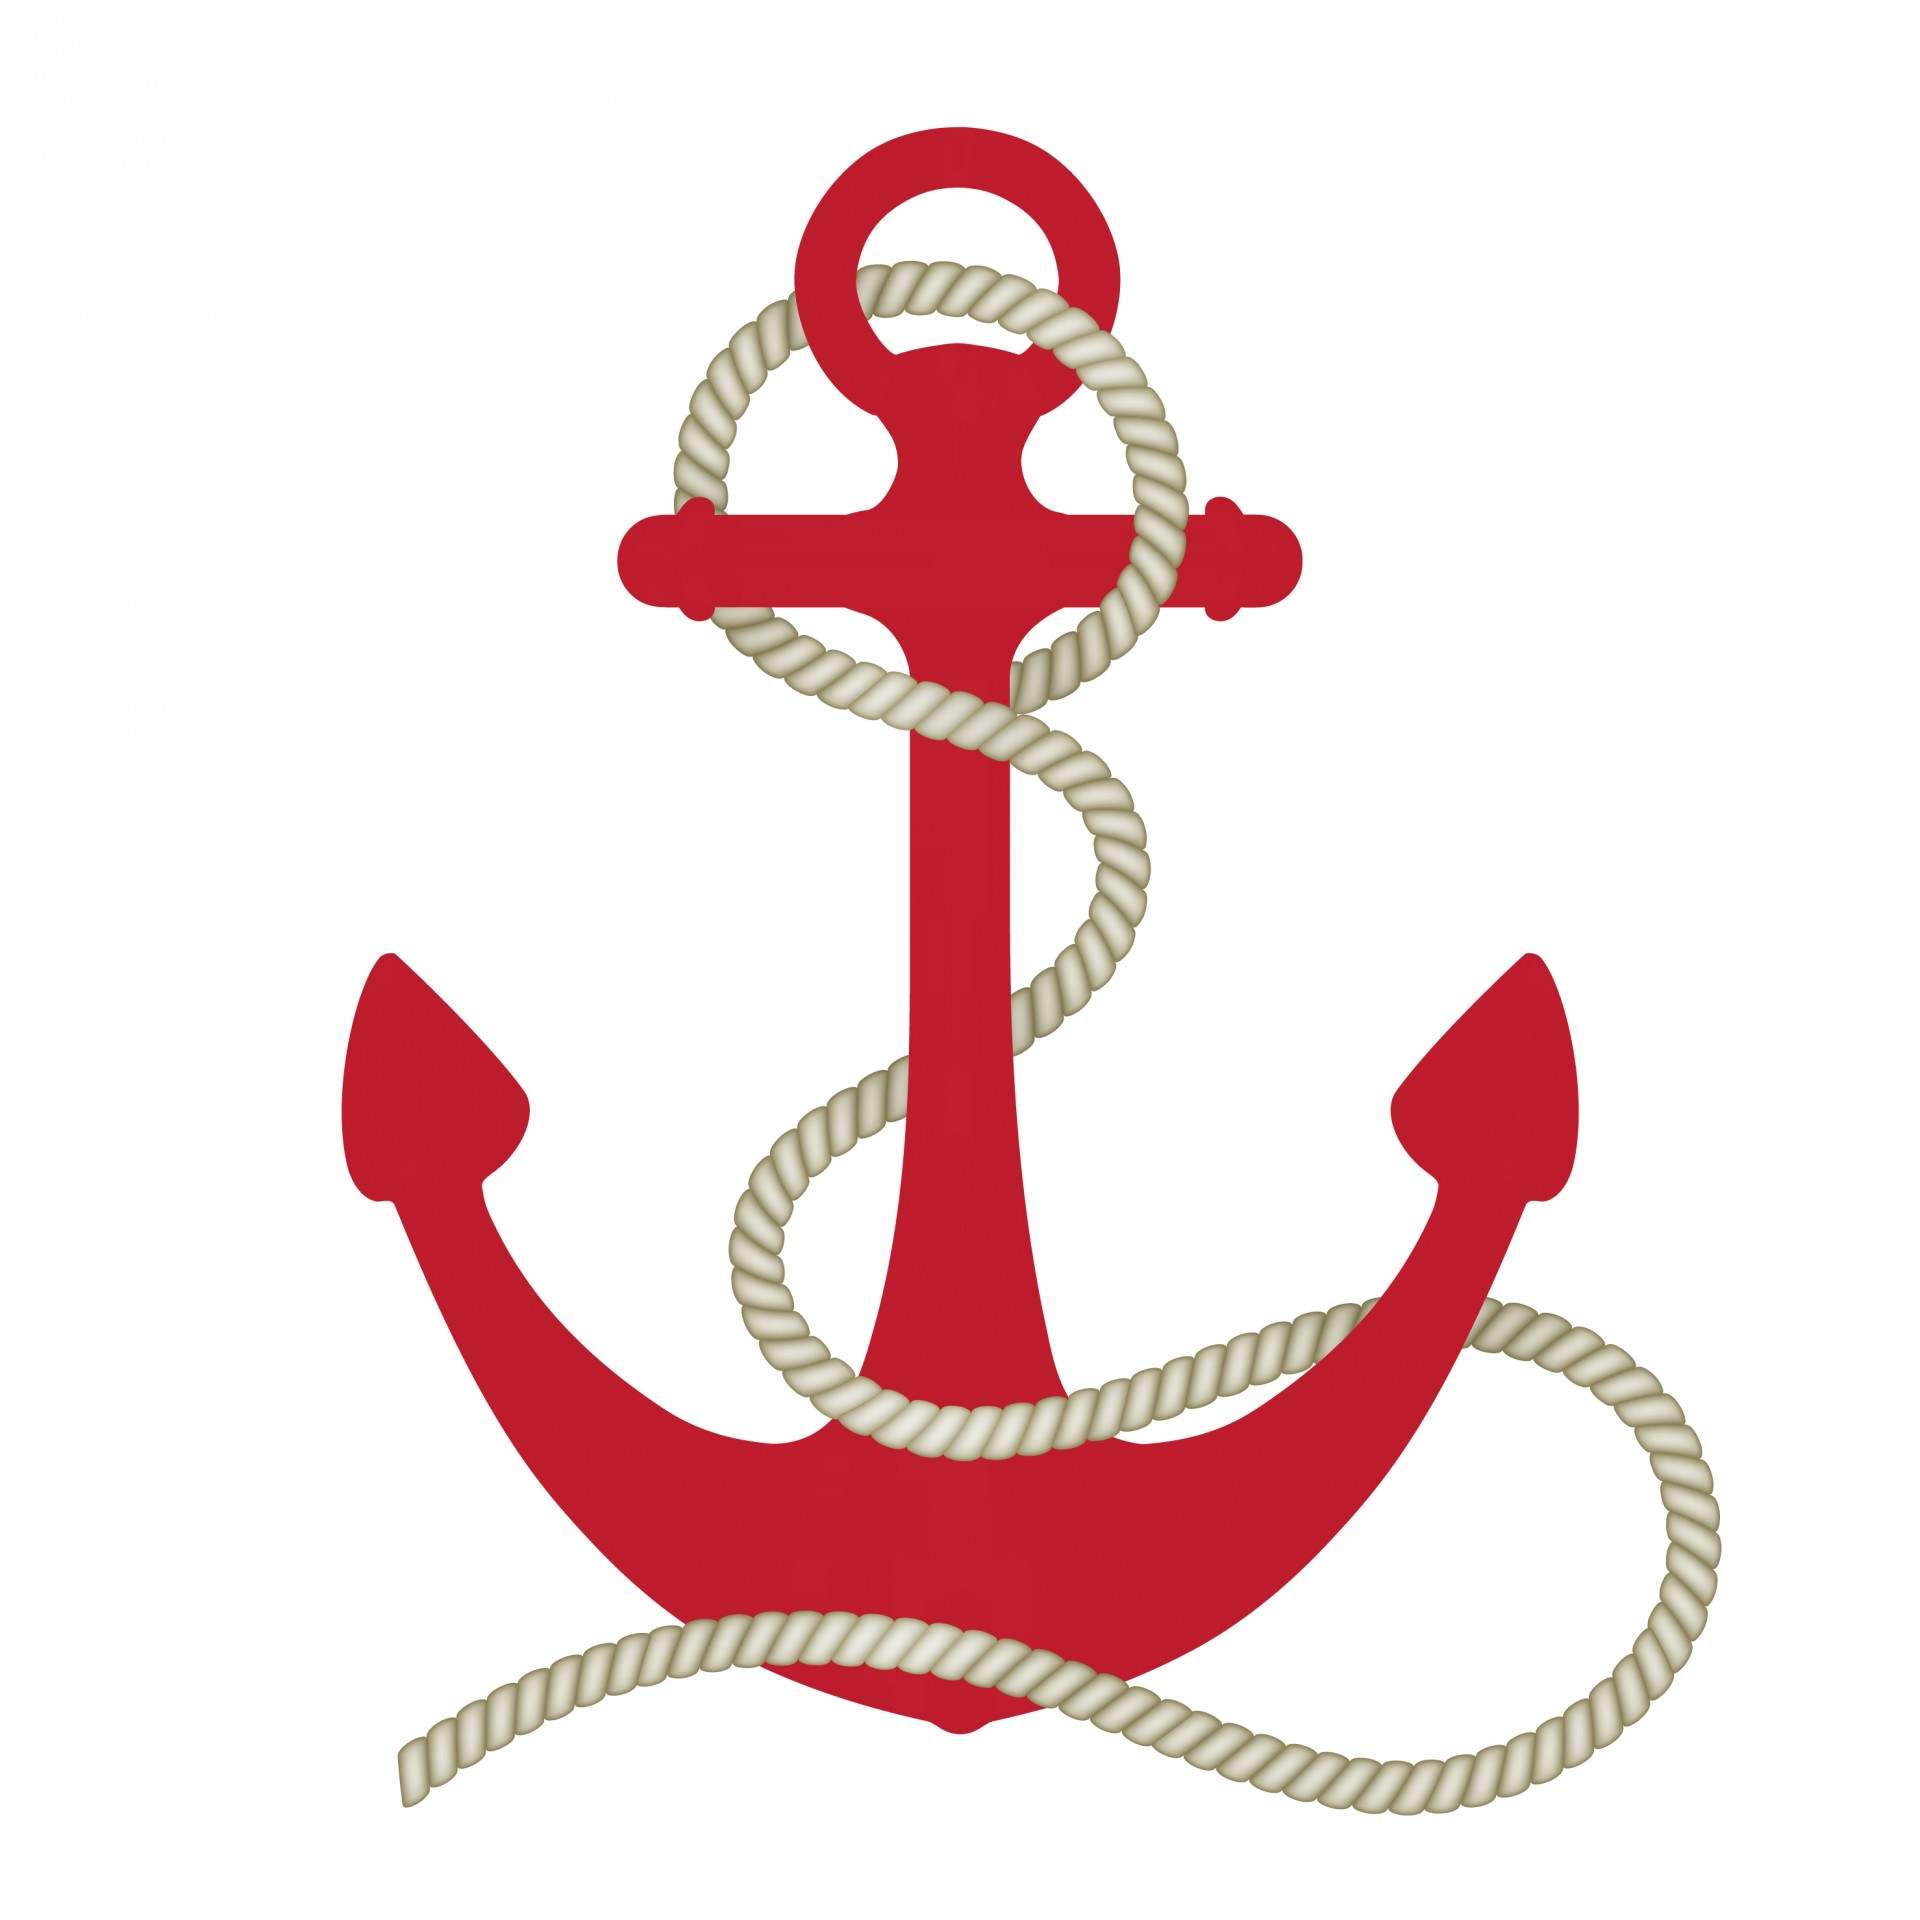 Anchor,rope,nautical,red,entwined